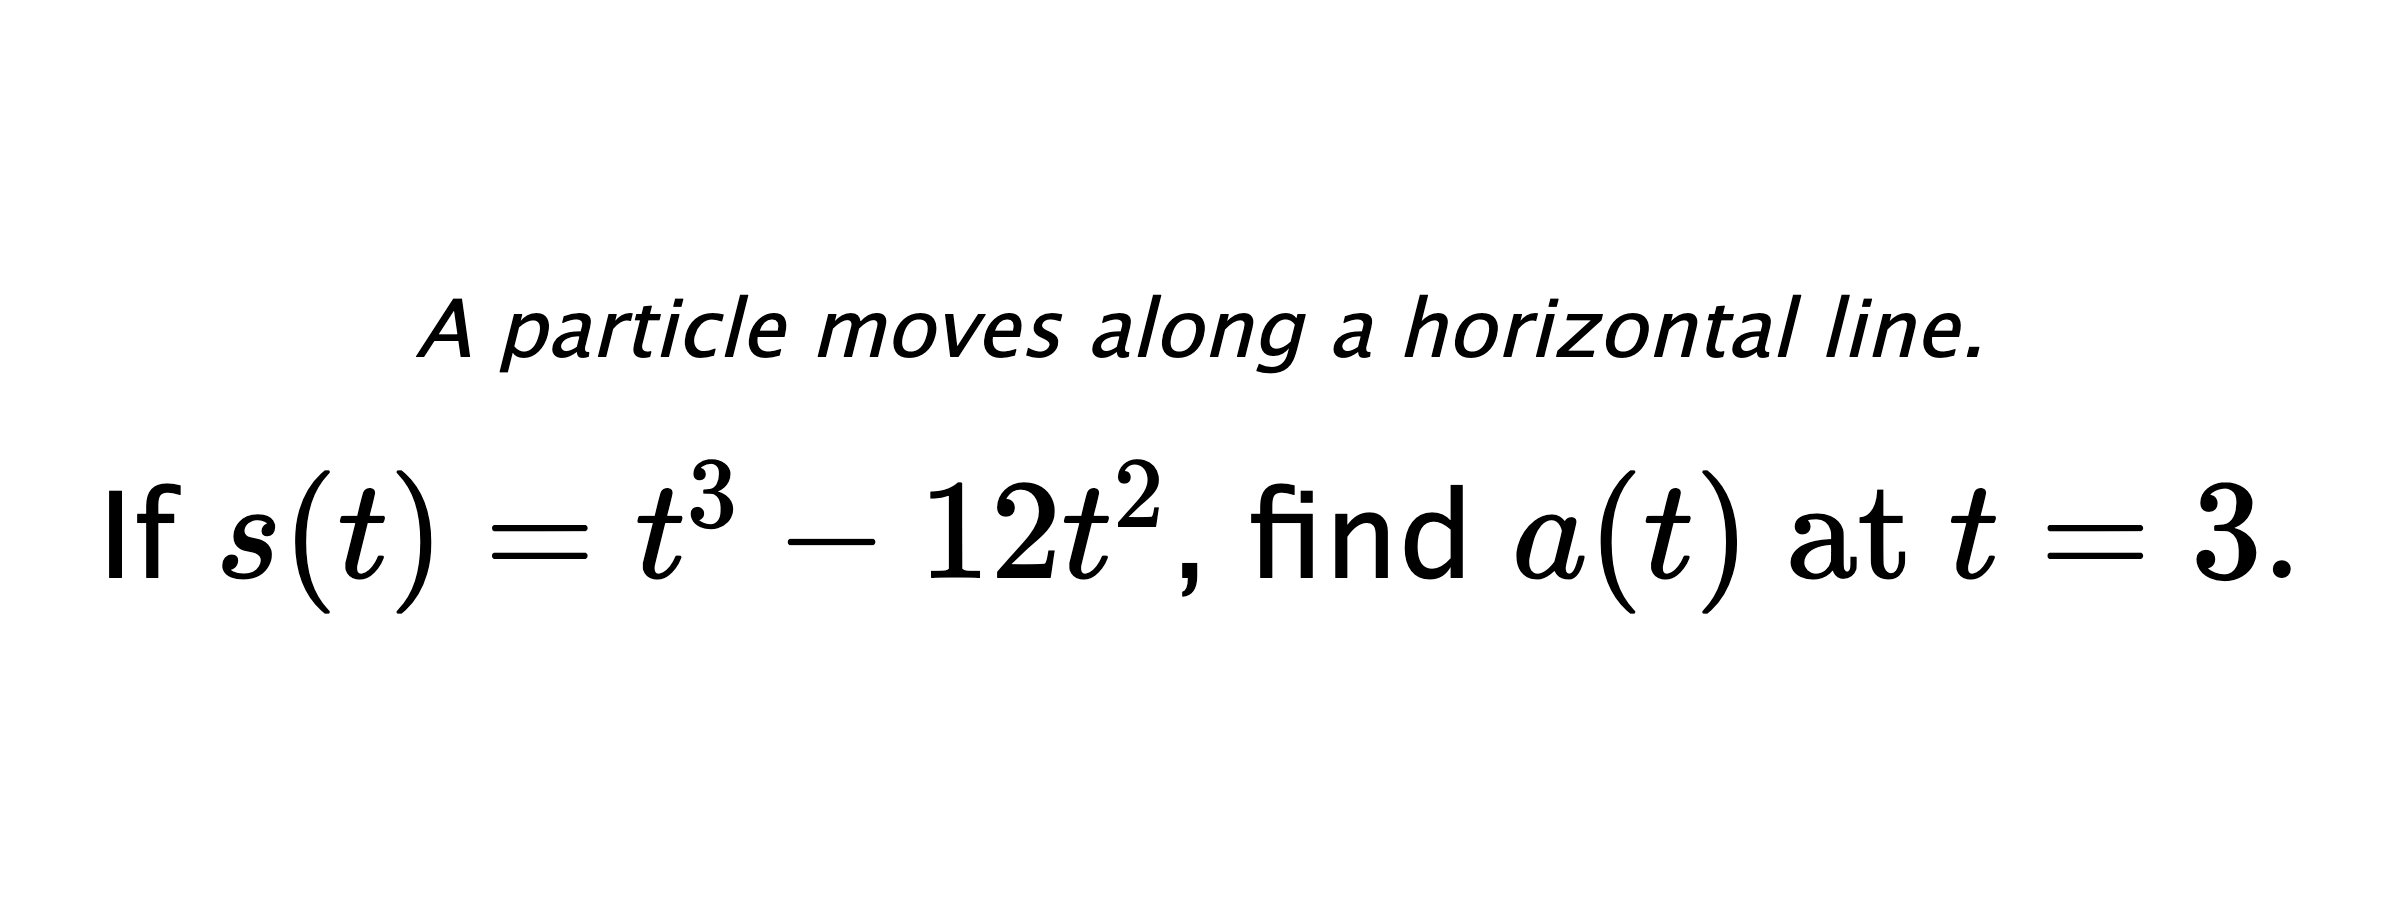 A particle moves along a horizontal line. If $ s(t)=t^3-12t^2 $, find $ a(t) \text{ at } t=3. $